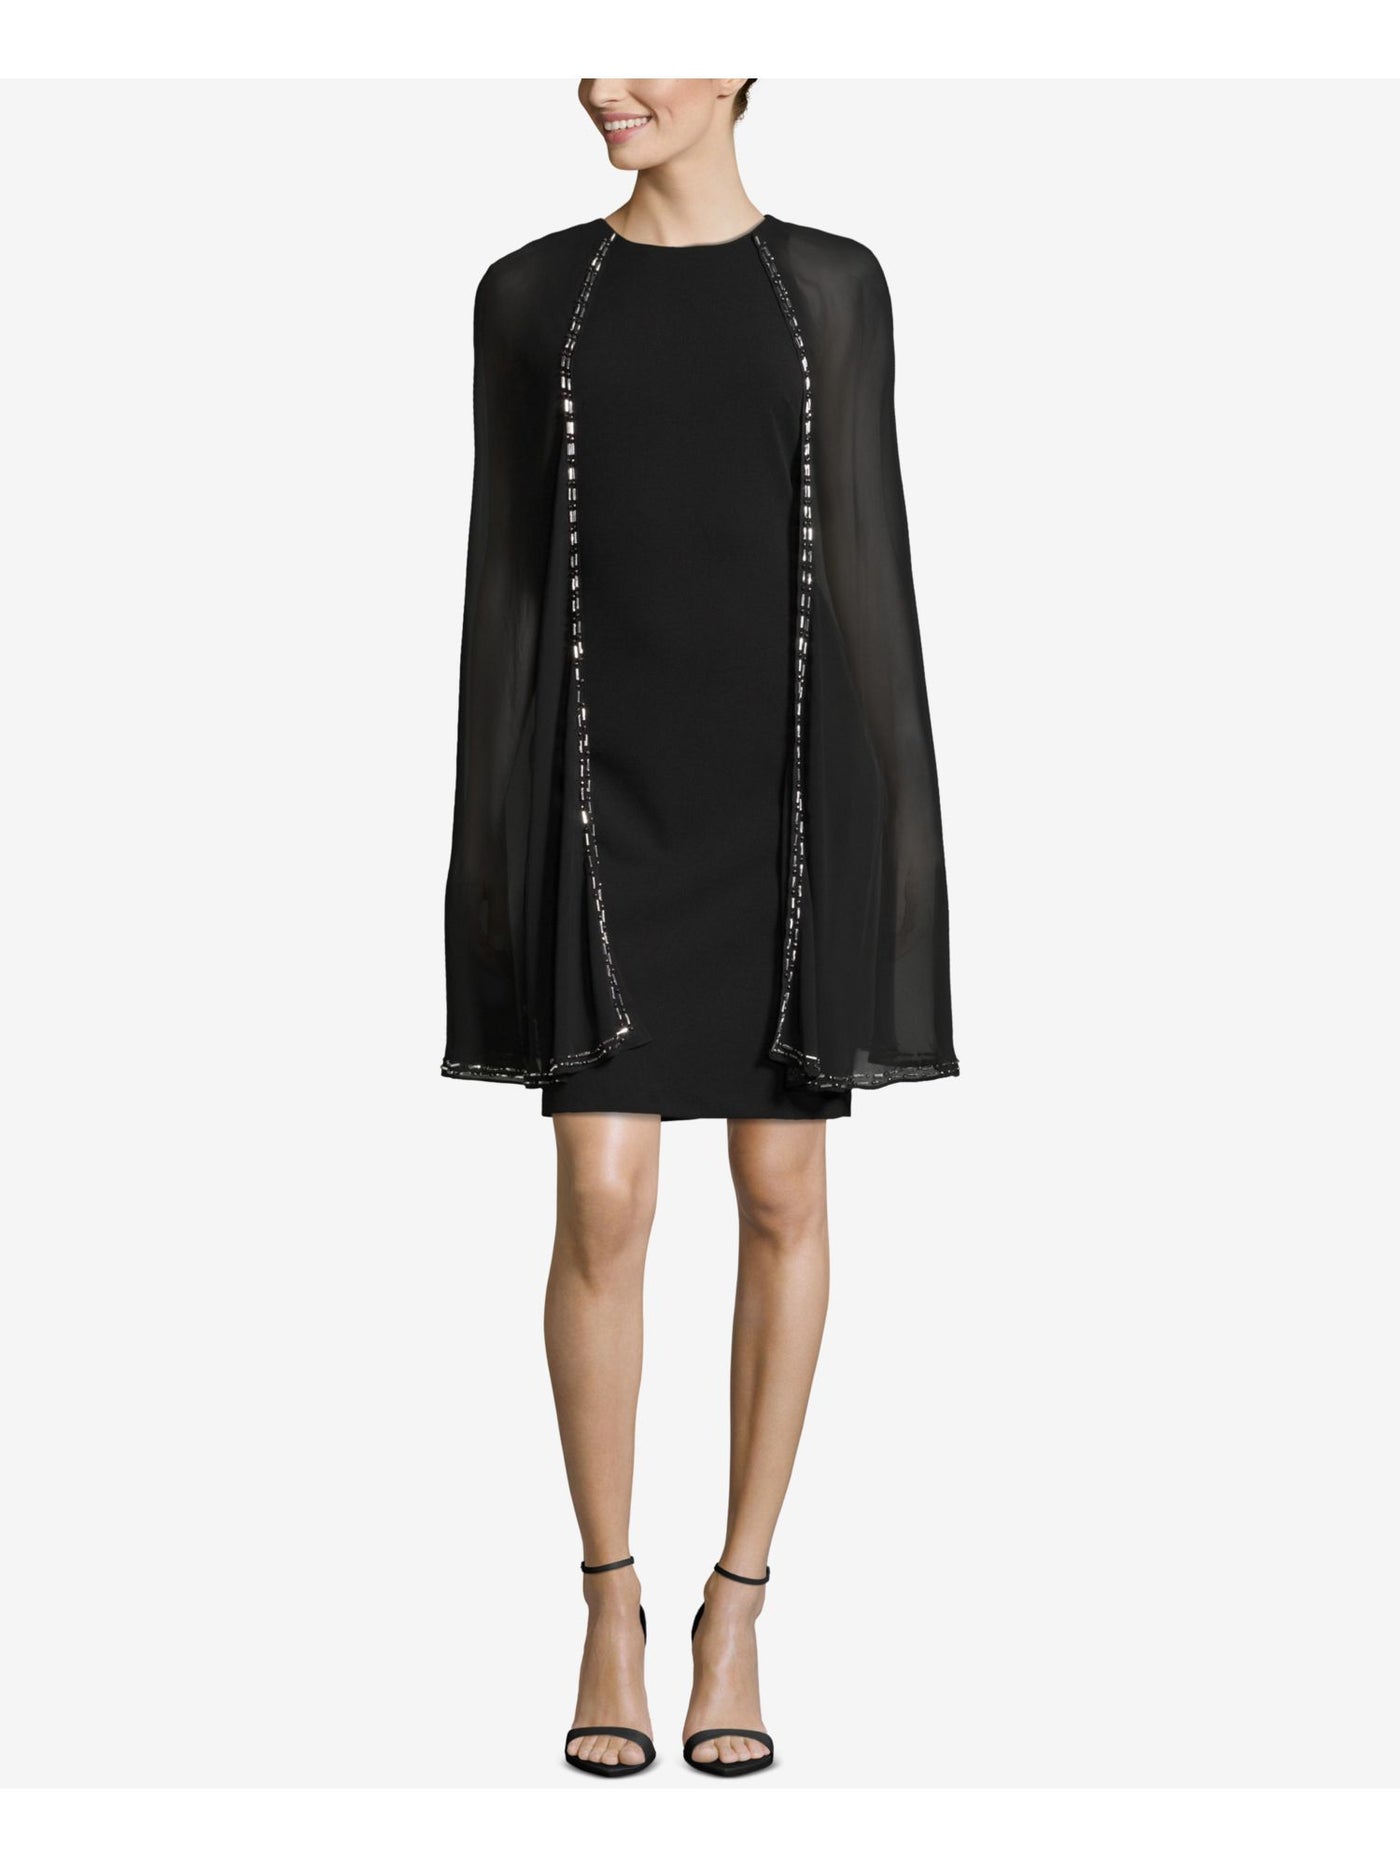 BETSY & ADAM Womens Black Embellished Sleeveless Above The Knee Cocktail Shift Dress Petites 8